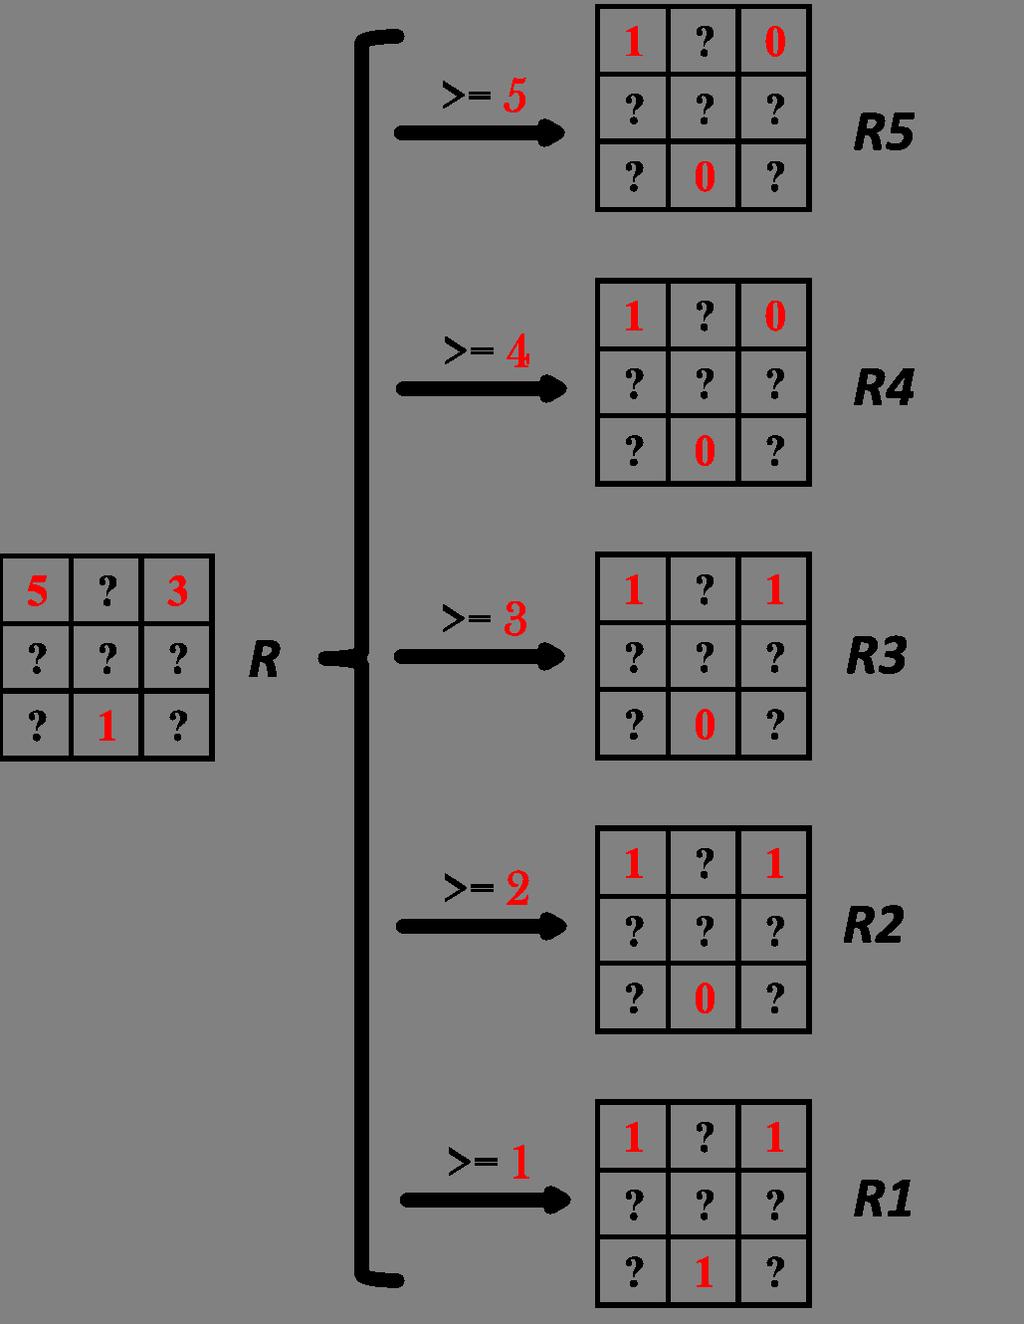 Ordinal Classification II: an example 1 generate decomposed binary matrices by discriminating rating